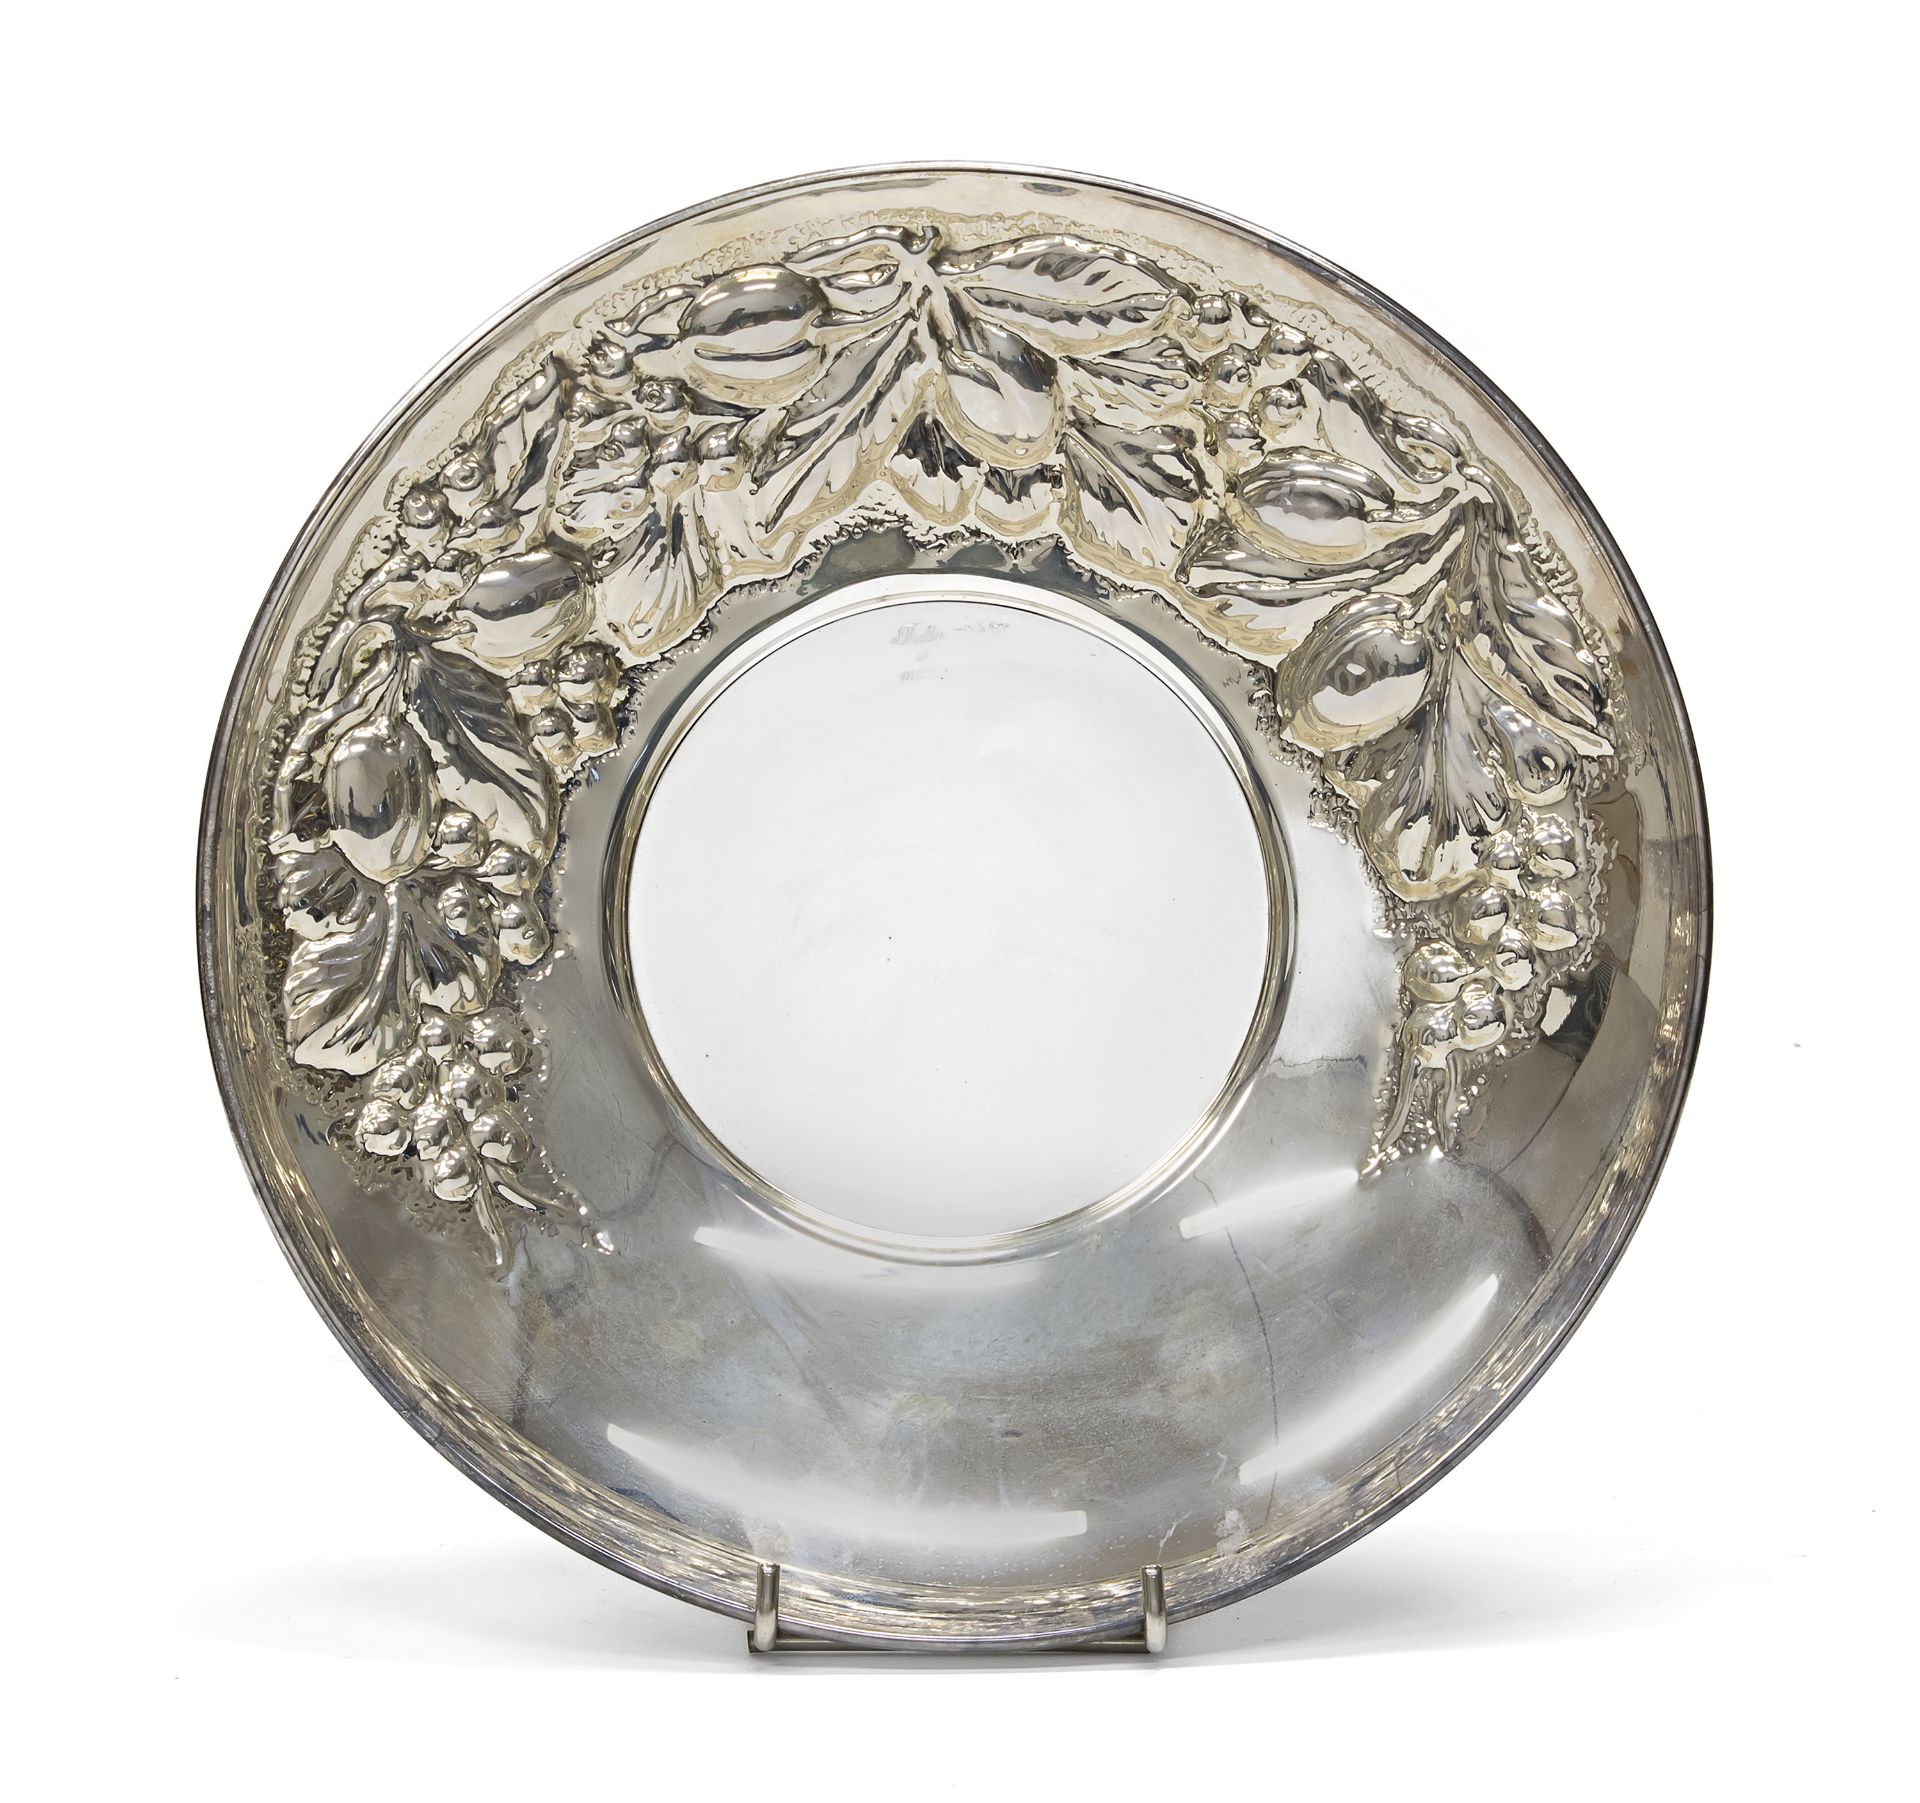 SILVER SOUP DISH ITALY 20TH CENTURY